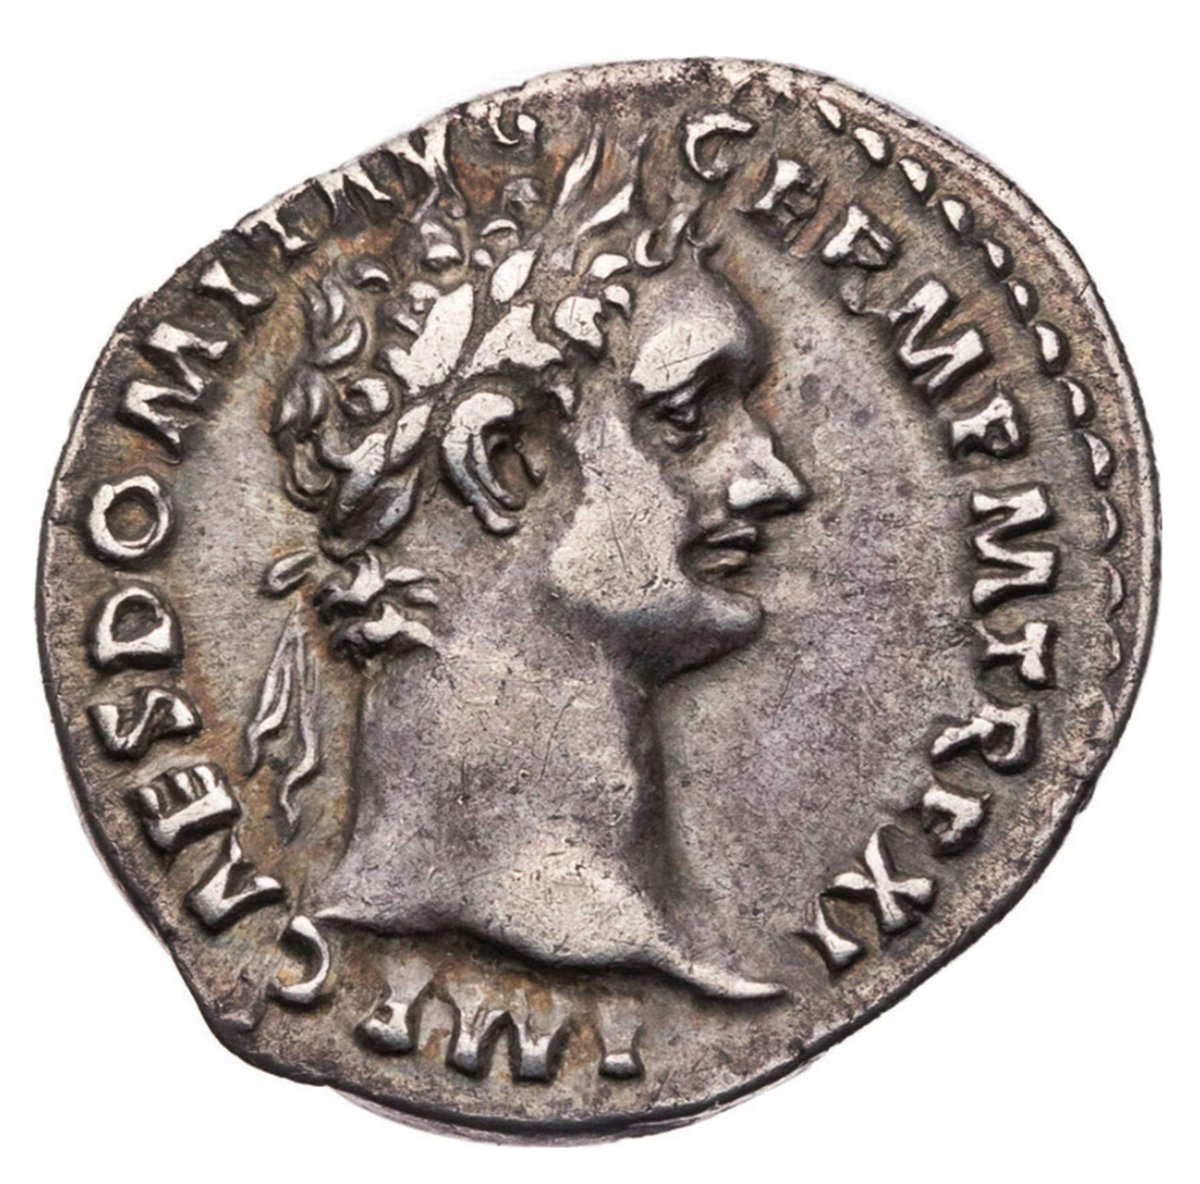 Gave a friend a Silver Denarius from my collection. He later told me he'd lost it in the streets of Ambleside. Which meant someone would find a ancient coin in modern Ambleside.